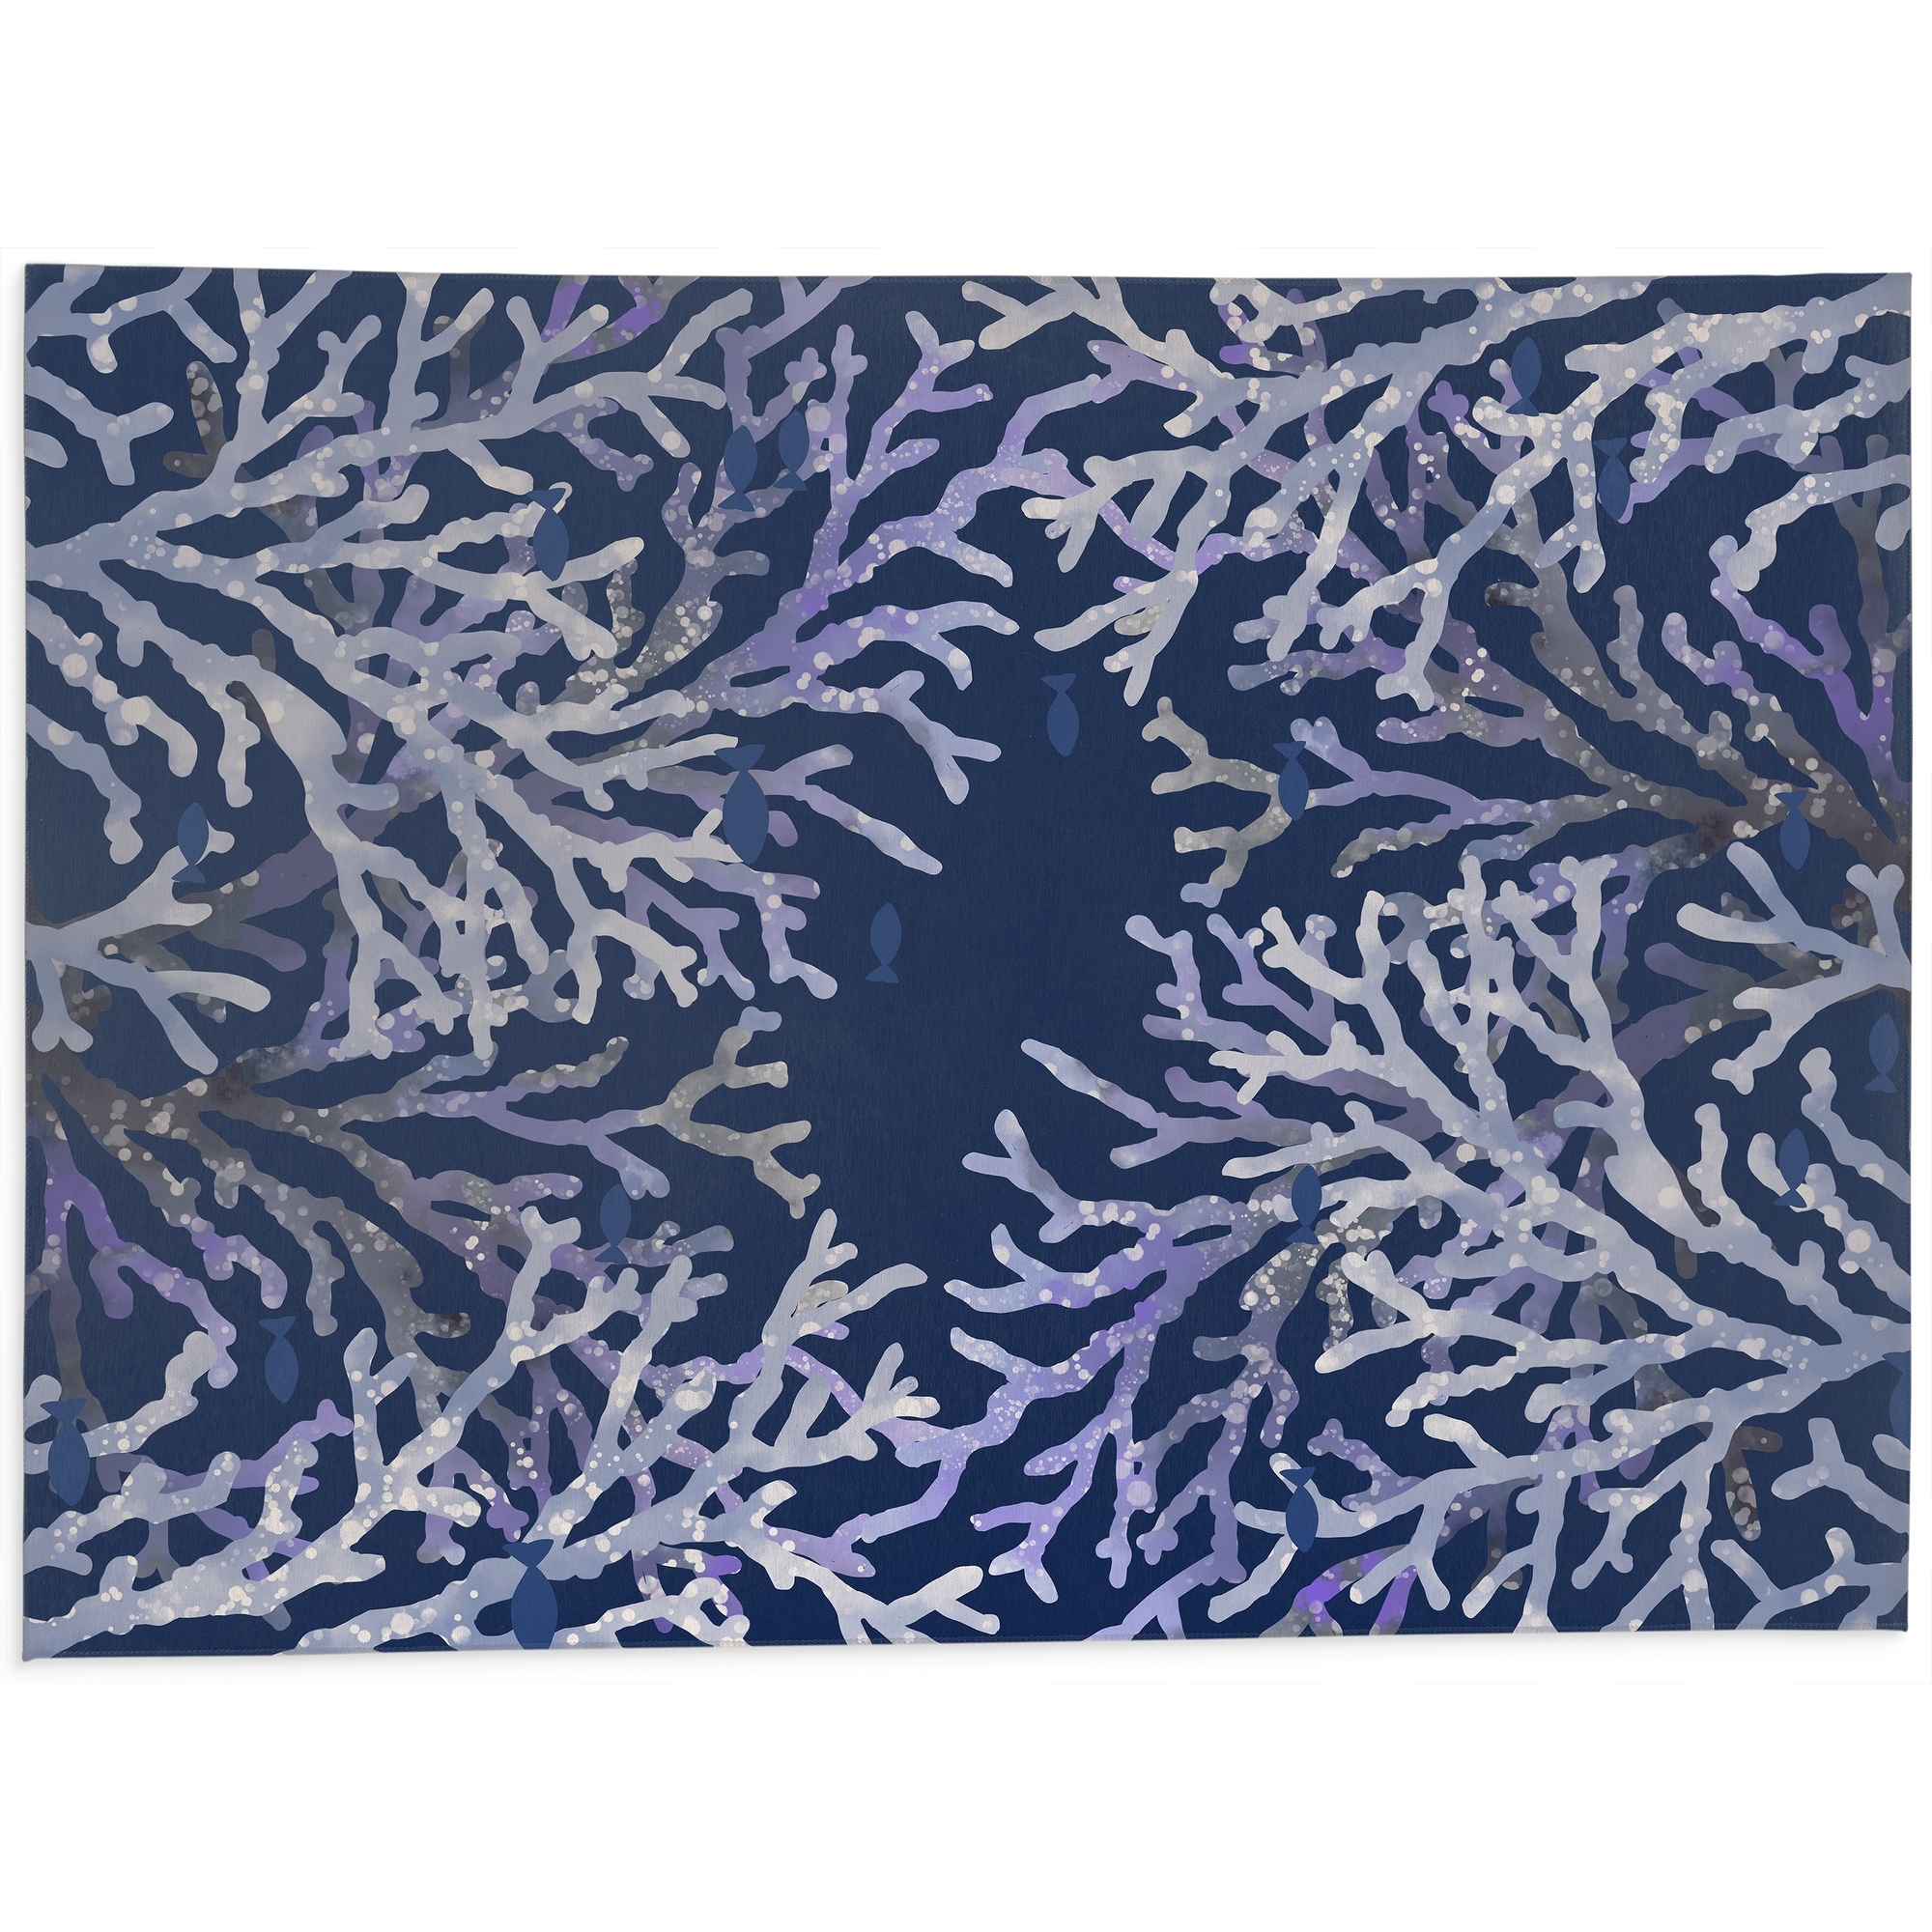 https://ak1.ostkcdn.com/images/products/is/images/direct/9ba39d952bfe23ea35085bb837bfad0a55dcc11d/CORAL-NAVY-Kitchen-Mat-By-Kavka-Designs.jpg